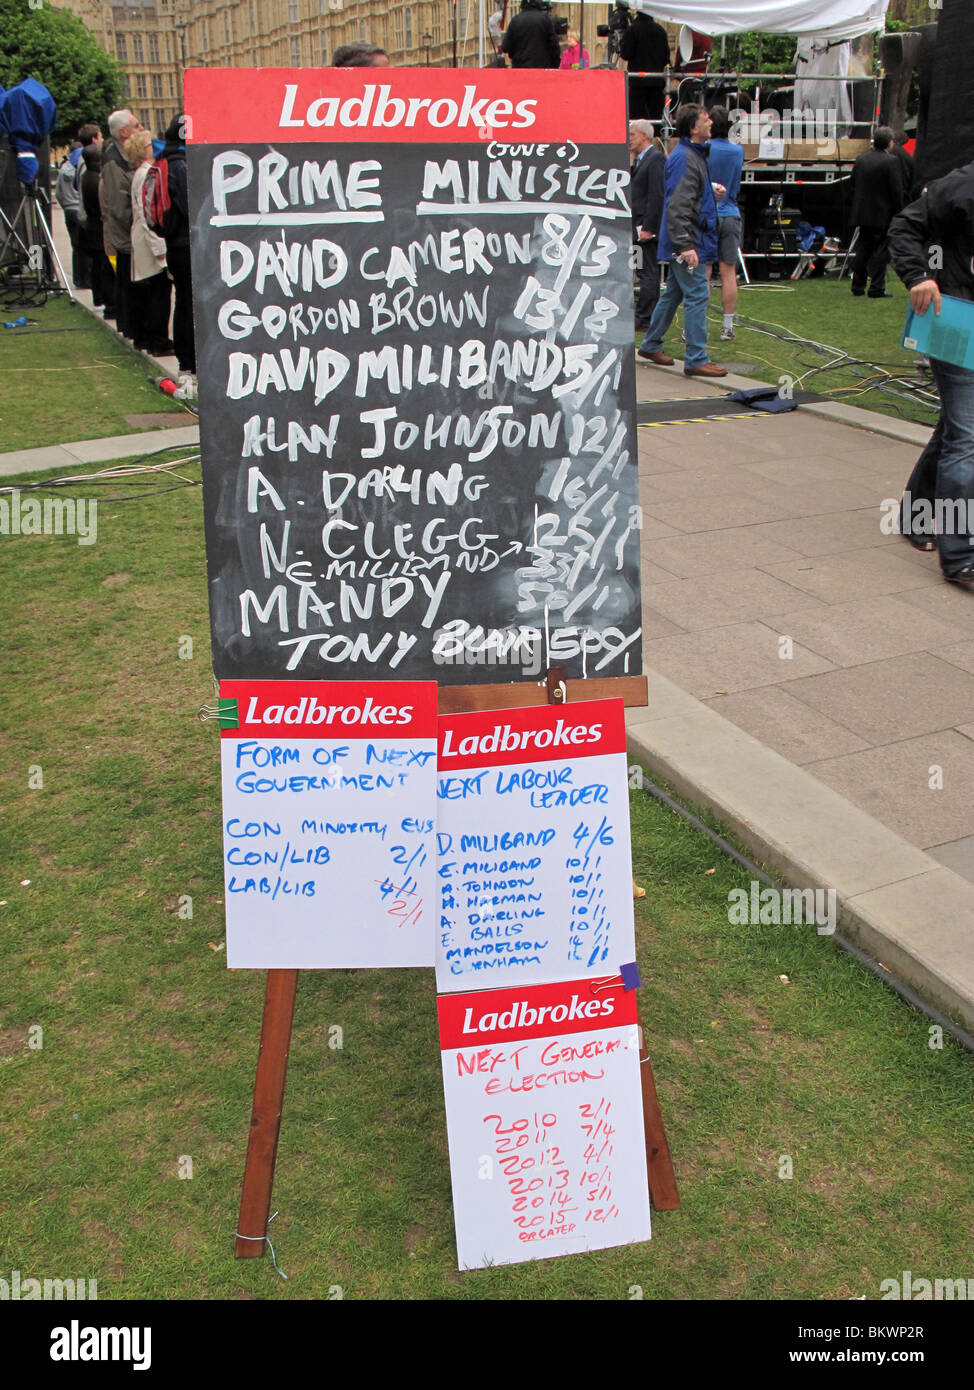 Ladbrokes bets betting odds General Election 2010 Hung Parliament Media Coverage Stock Photo